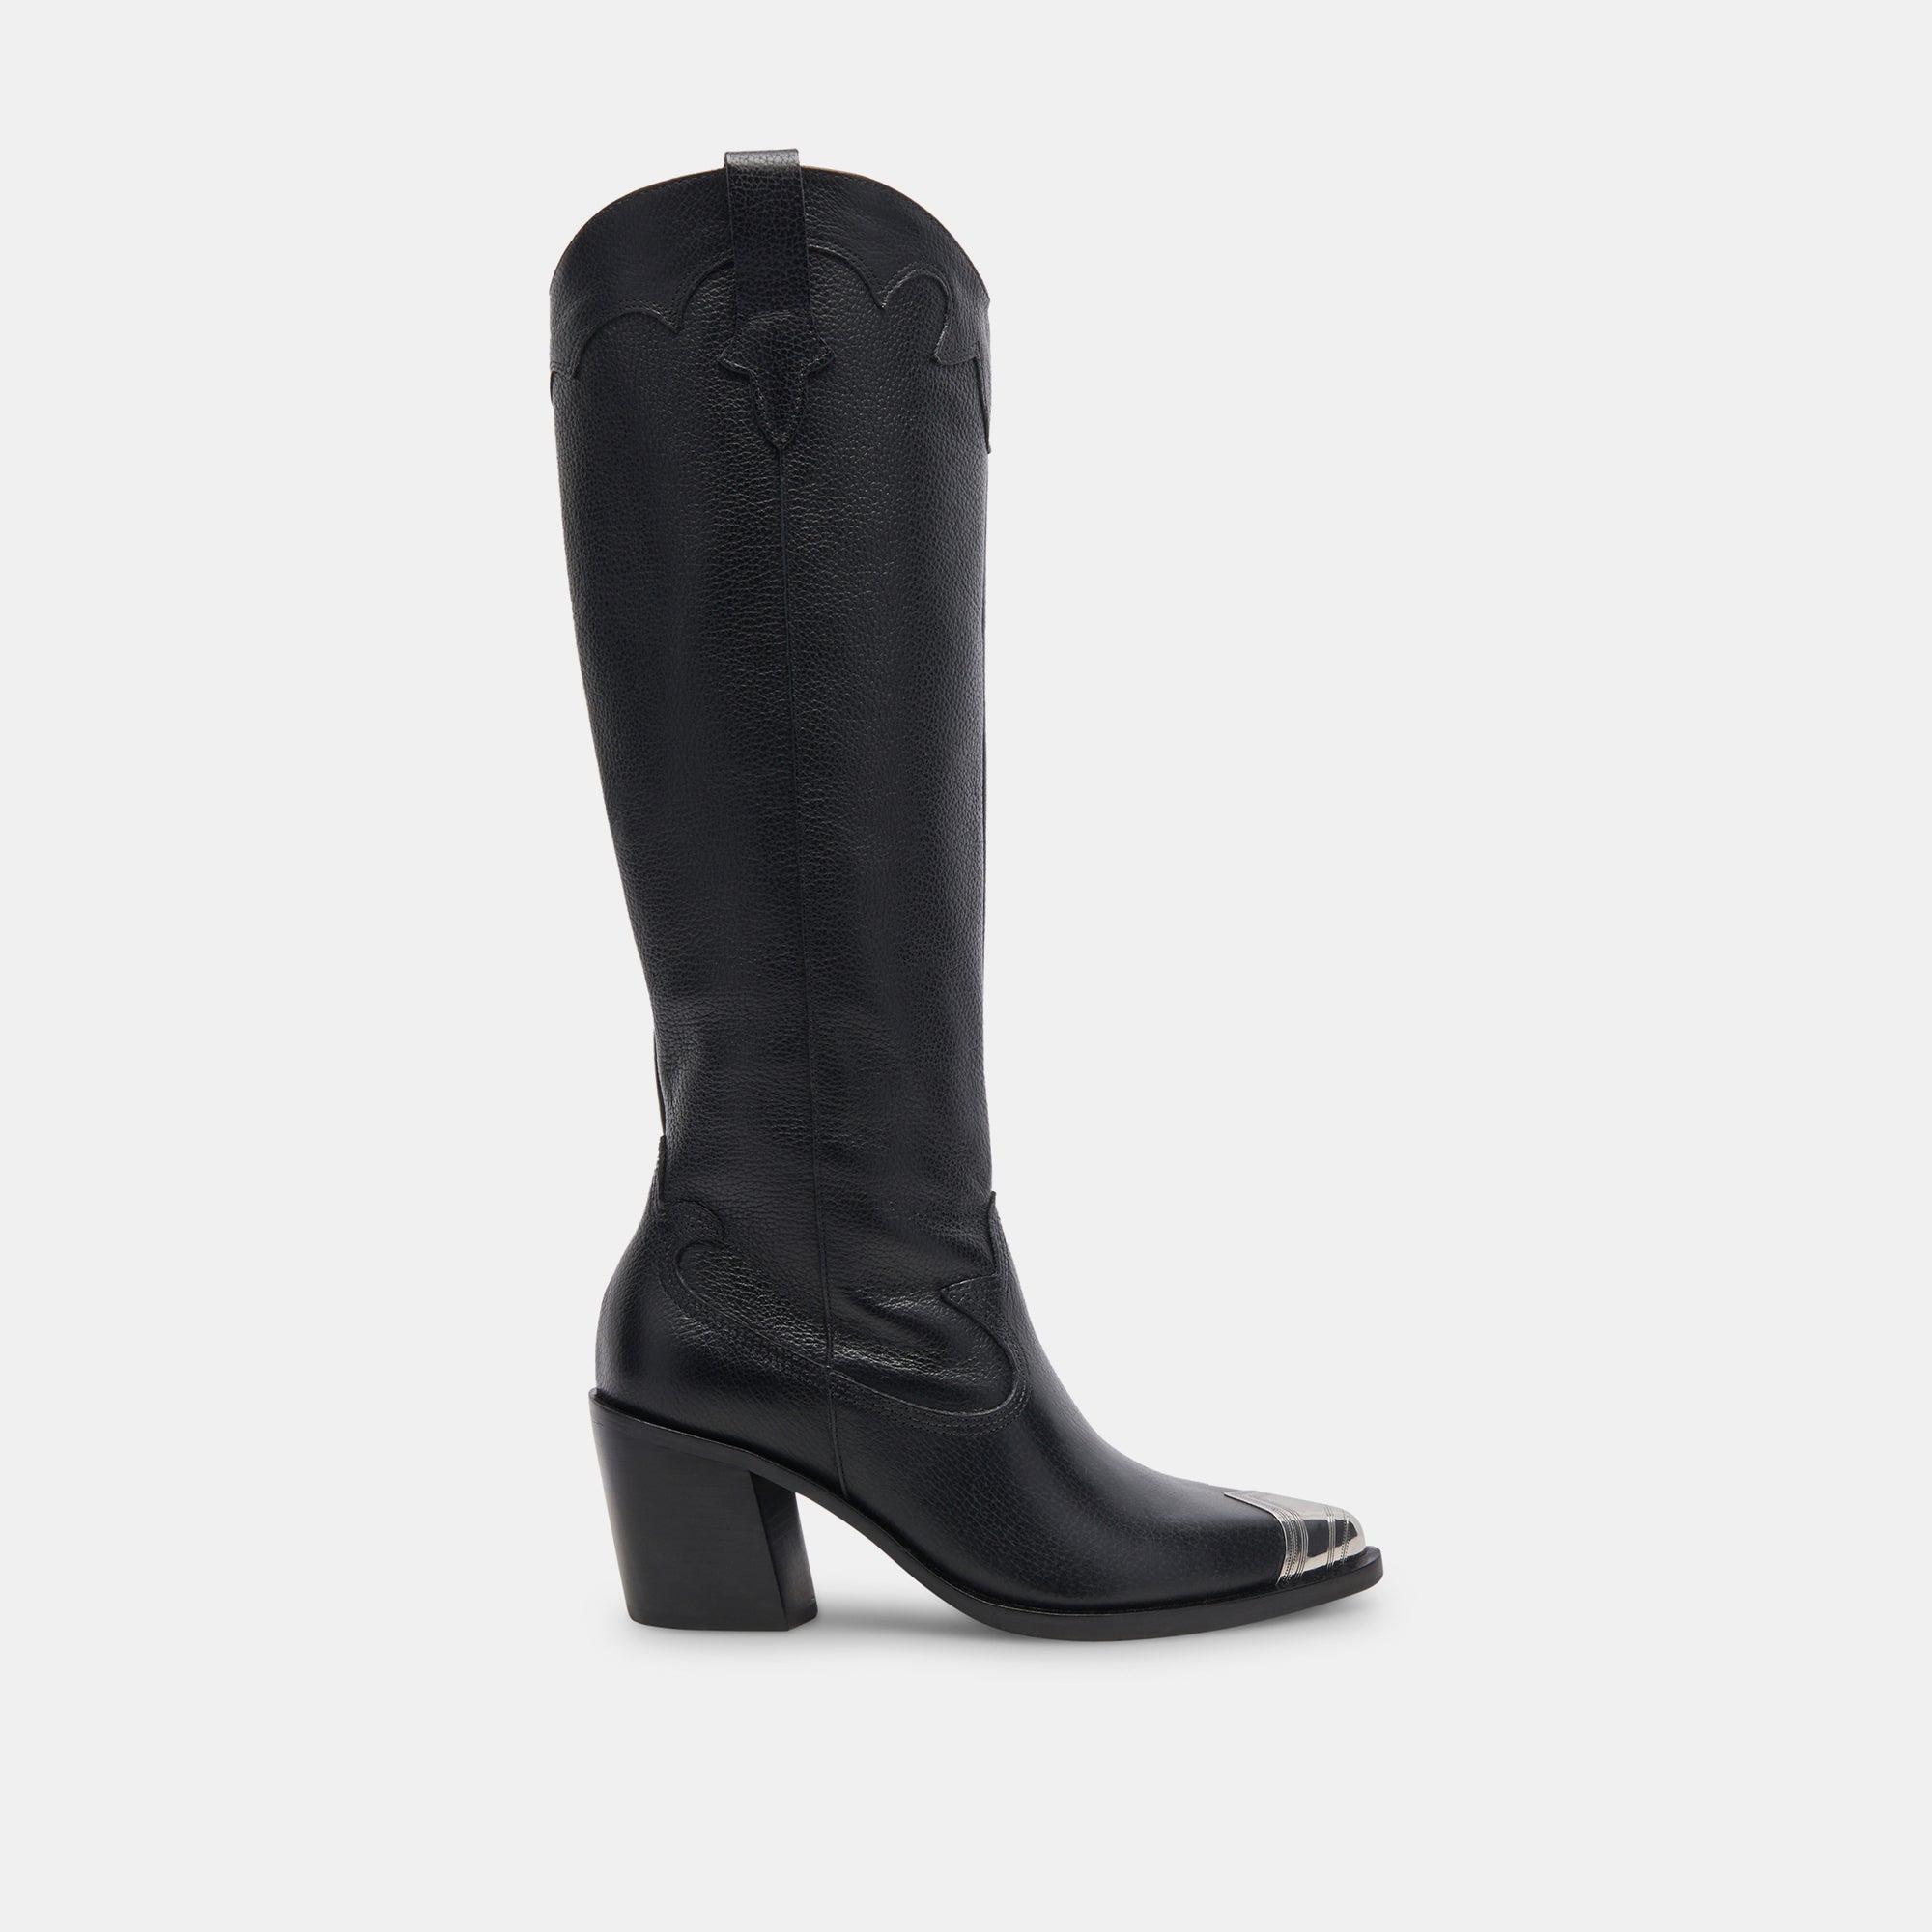 KAMRYN BOOTS BLACK LEATHER